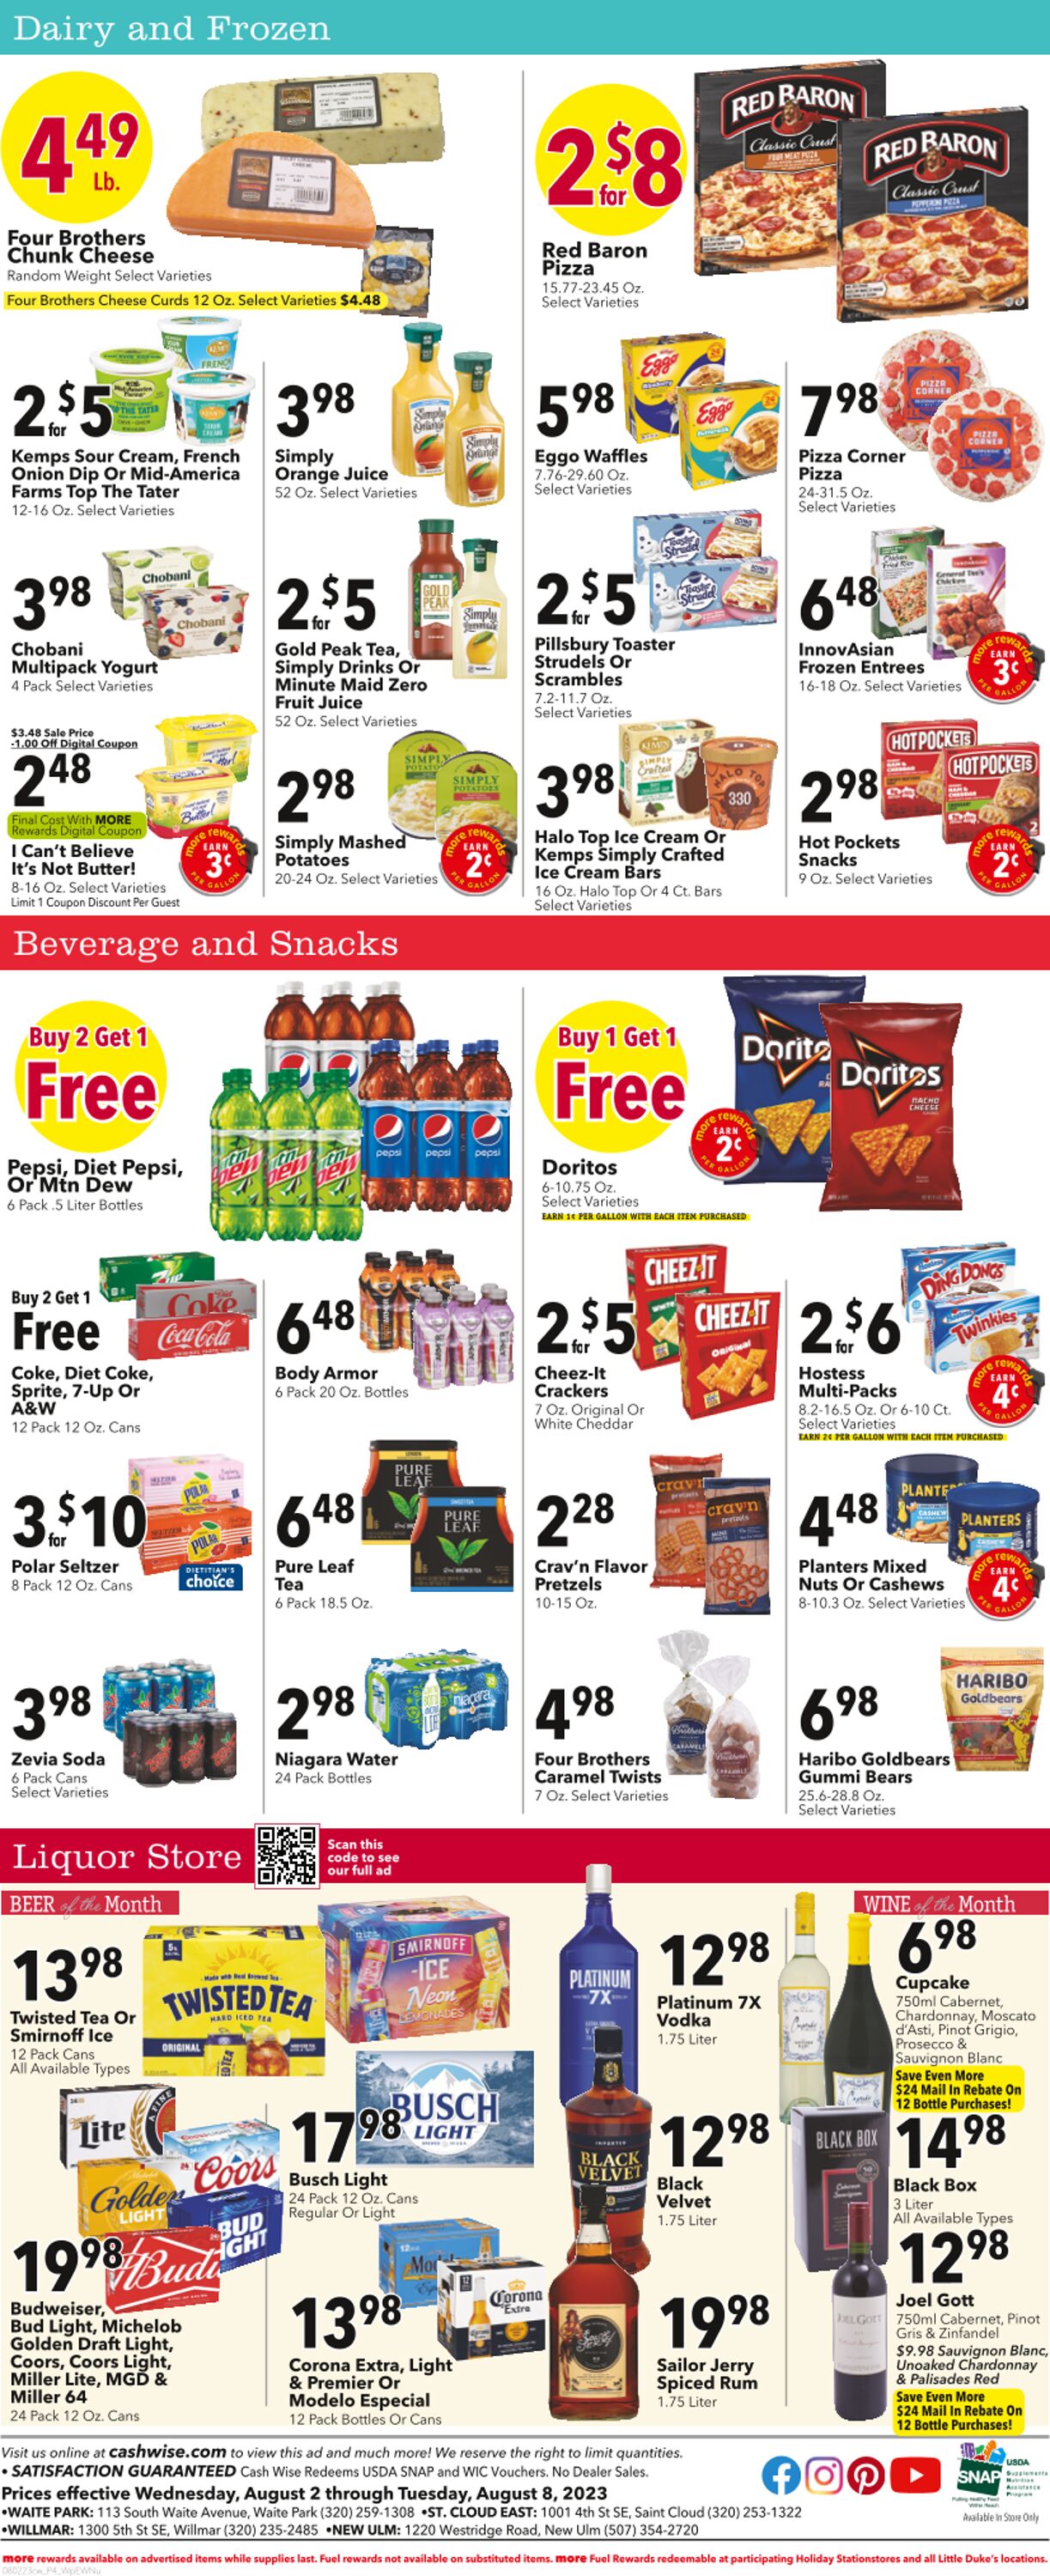 Cash Wise Weekly Ad Circular - valid 08/03-08/09/2023 (Page 4)